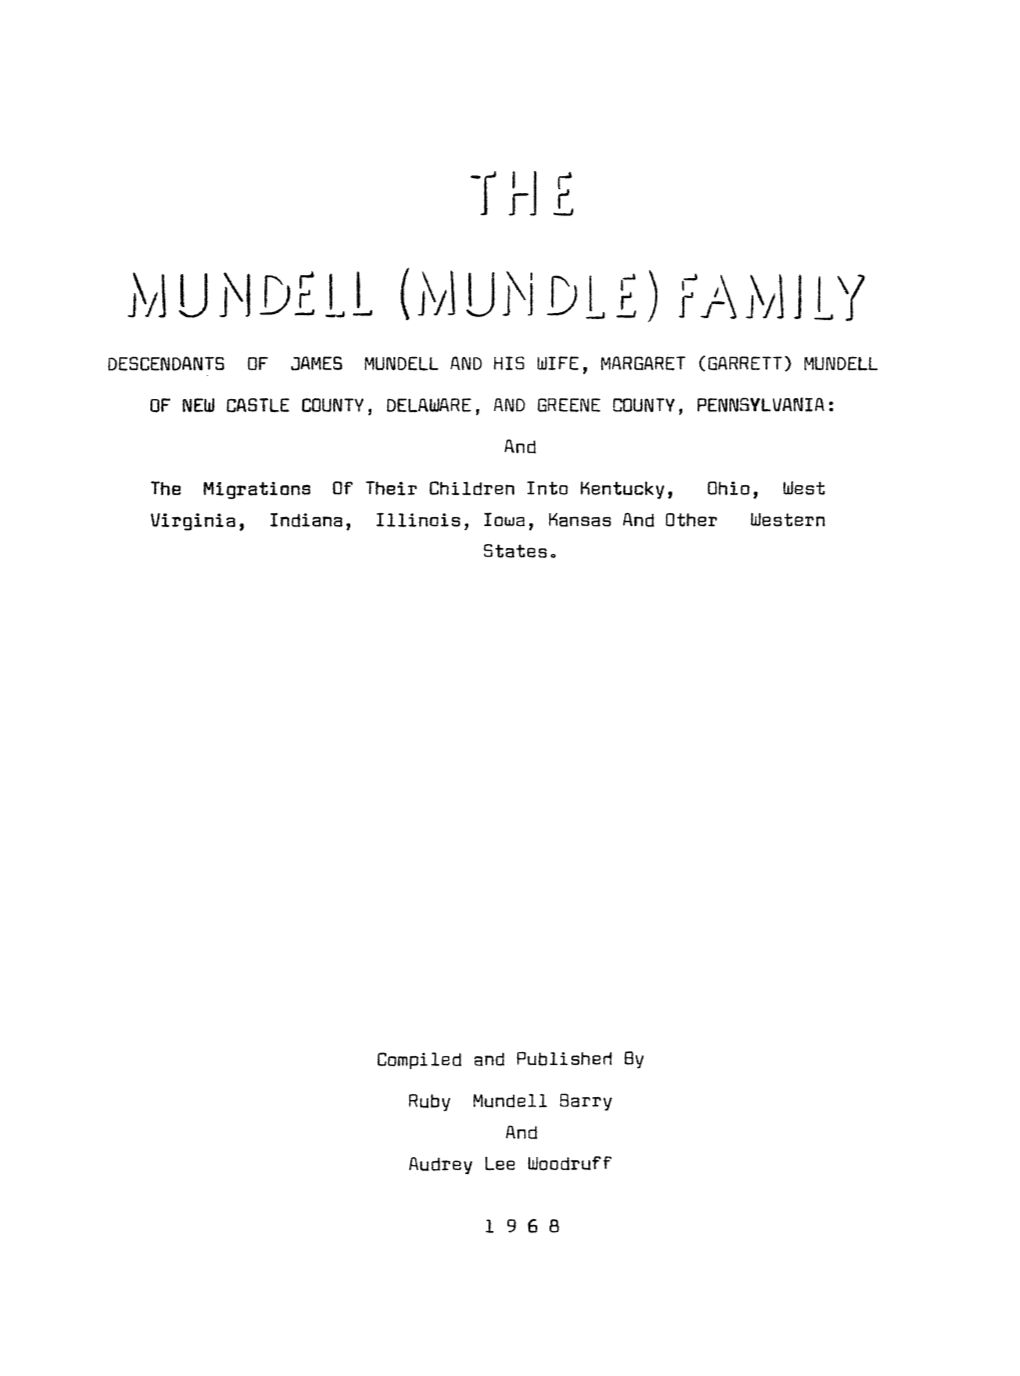 DESCENDANTS of JAMES MUNDELL and HIS WIFE, MARGARET (GARRETT) MUNDELL of NEW CASTLE COUNTY, DELAWARE, and GREENE COUNTY, PENNSYLVANIA: And